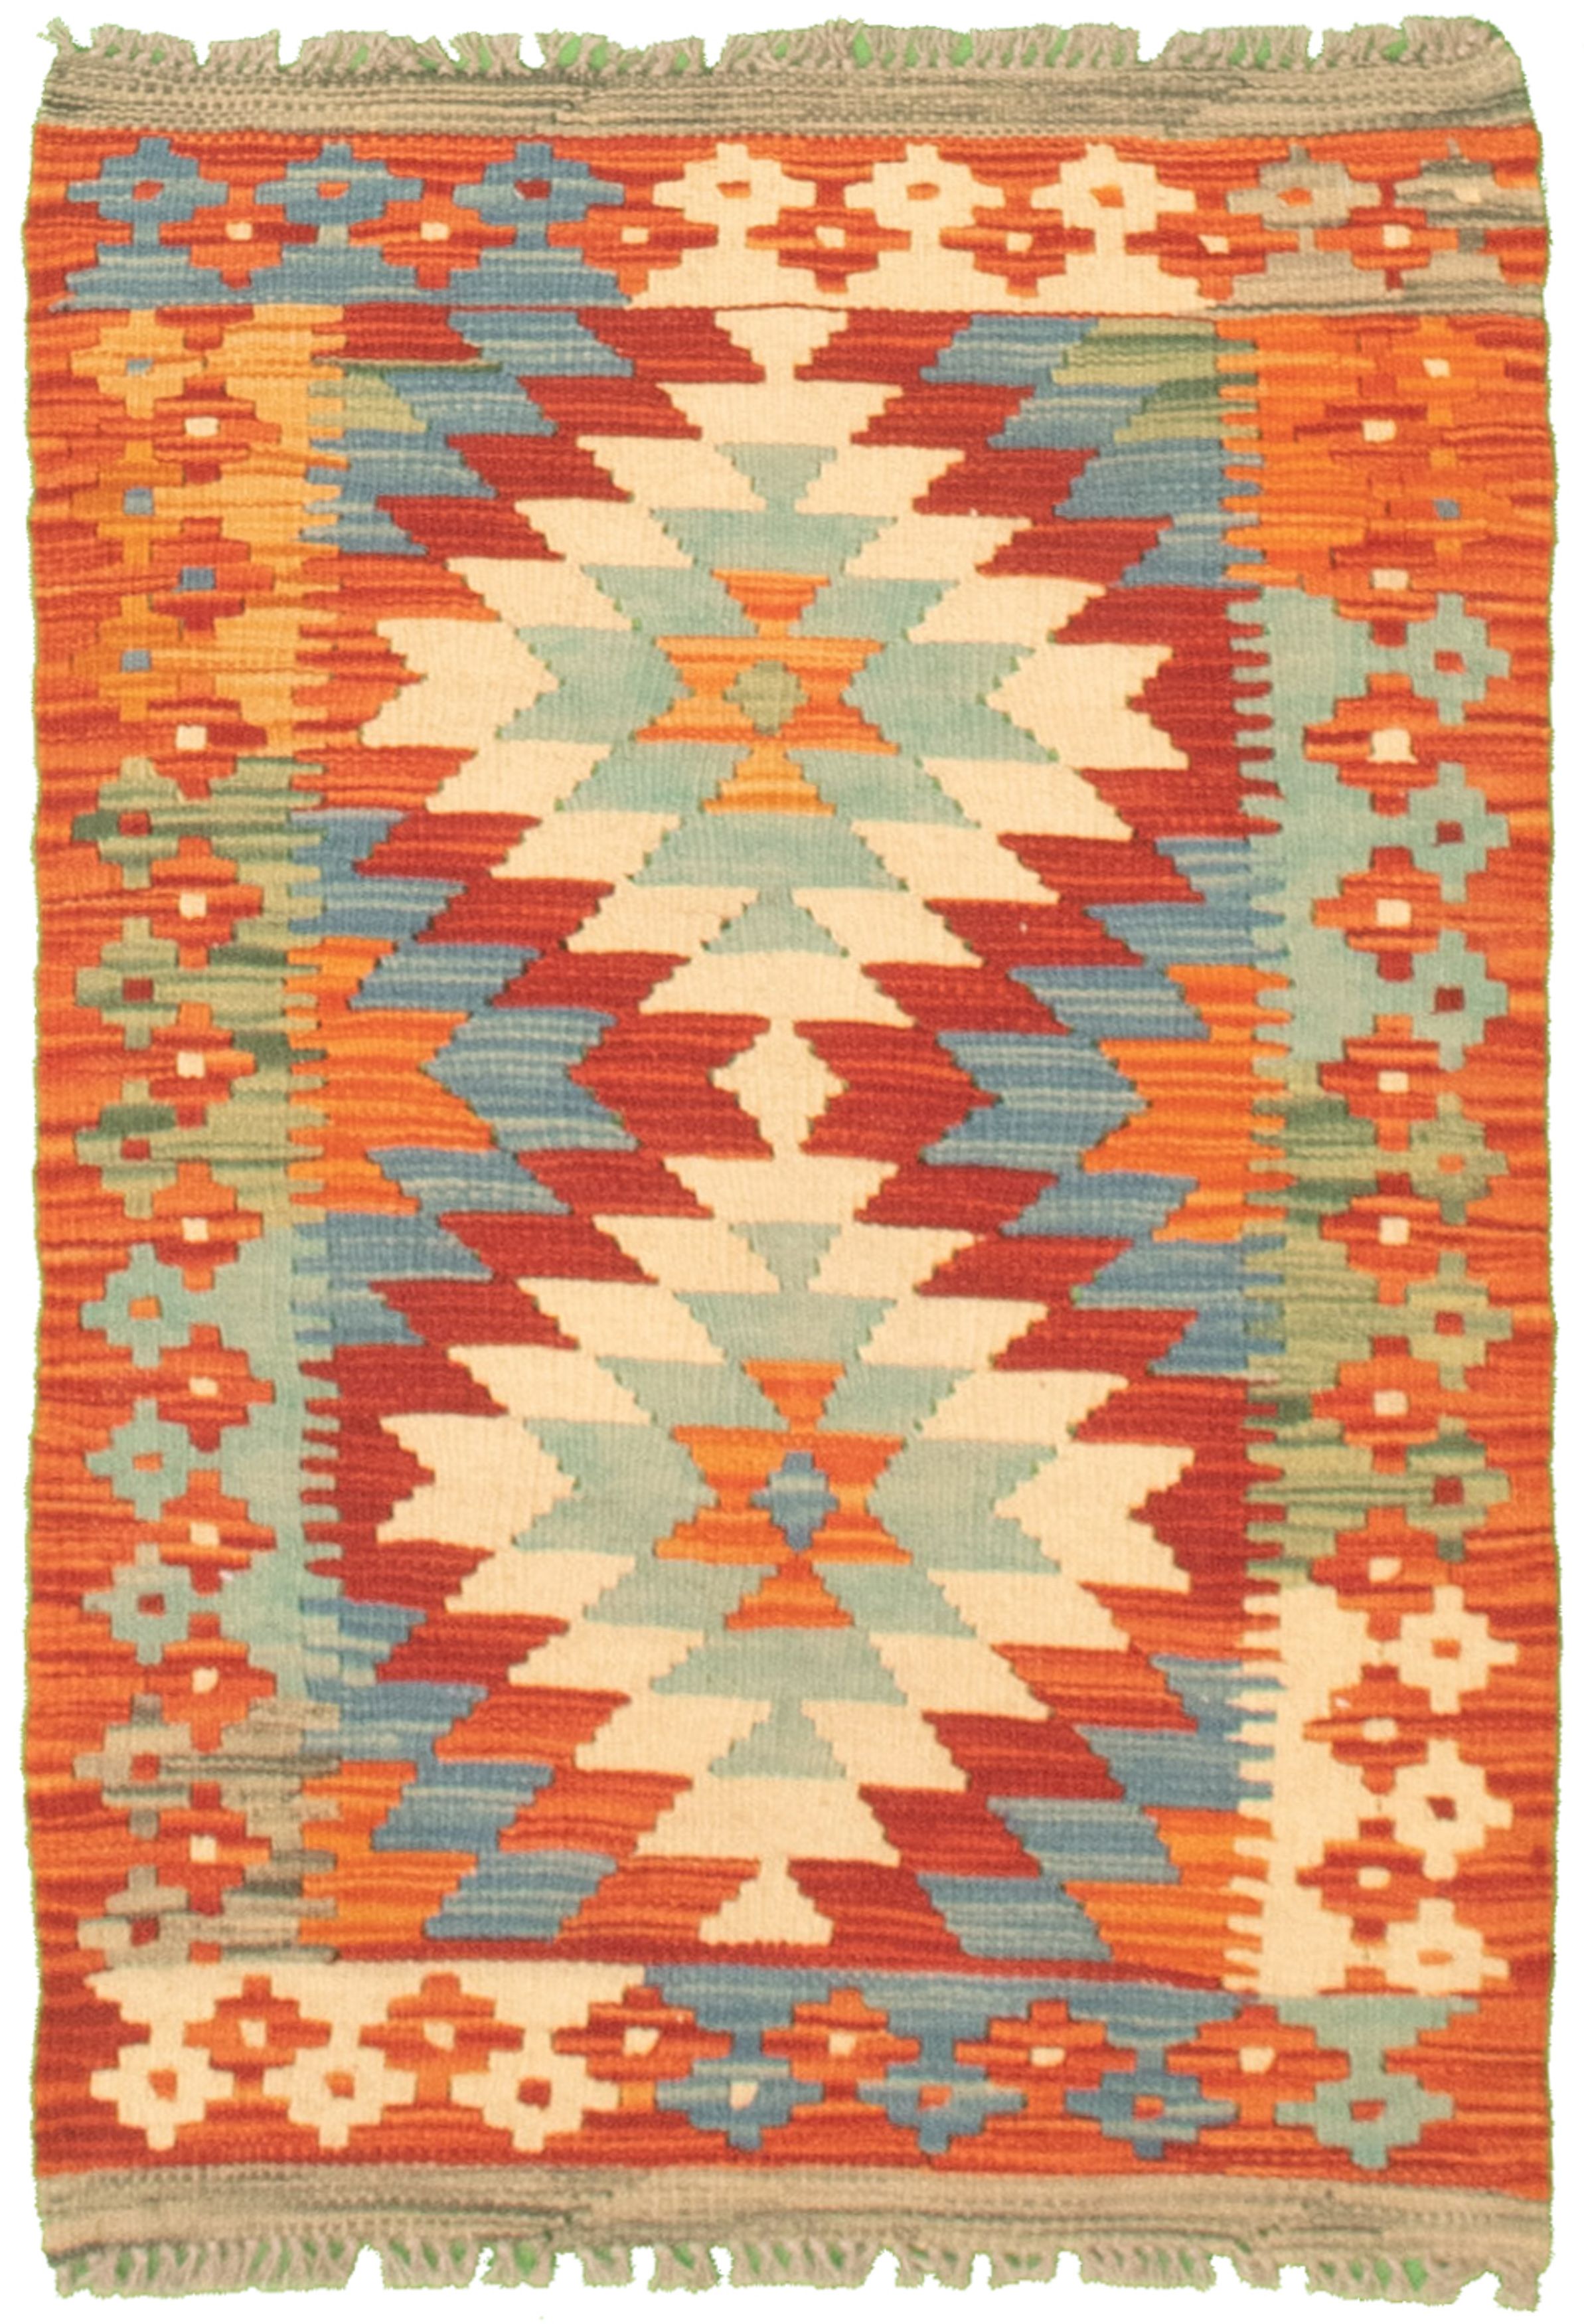 Hand woven Bold and Colorful  Red Cotton Kilim 2'0" x 3'0" Size: 2'0" x 3'0"  